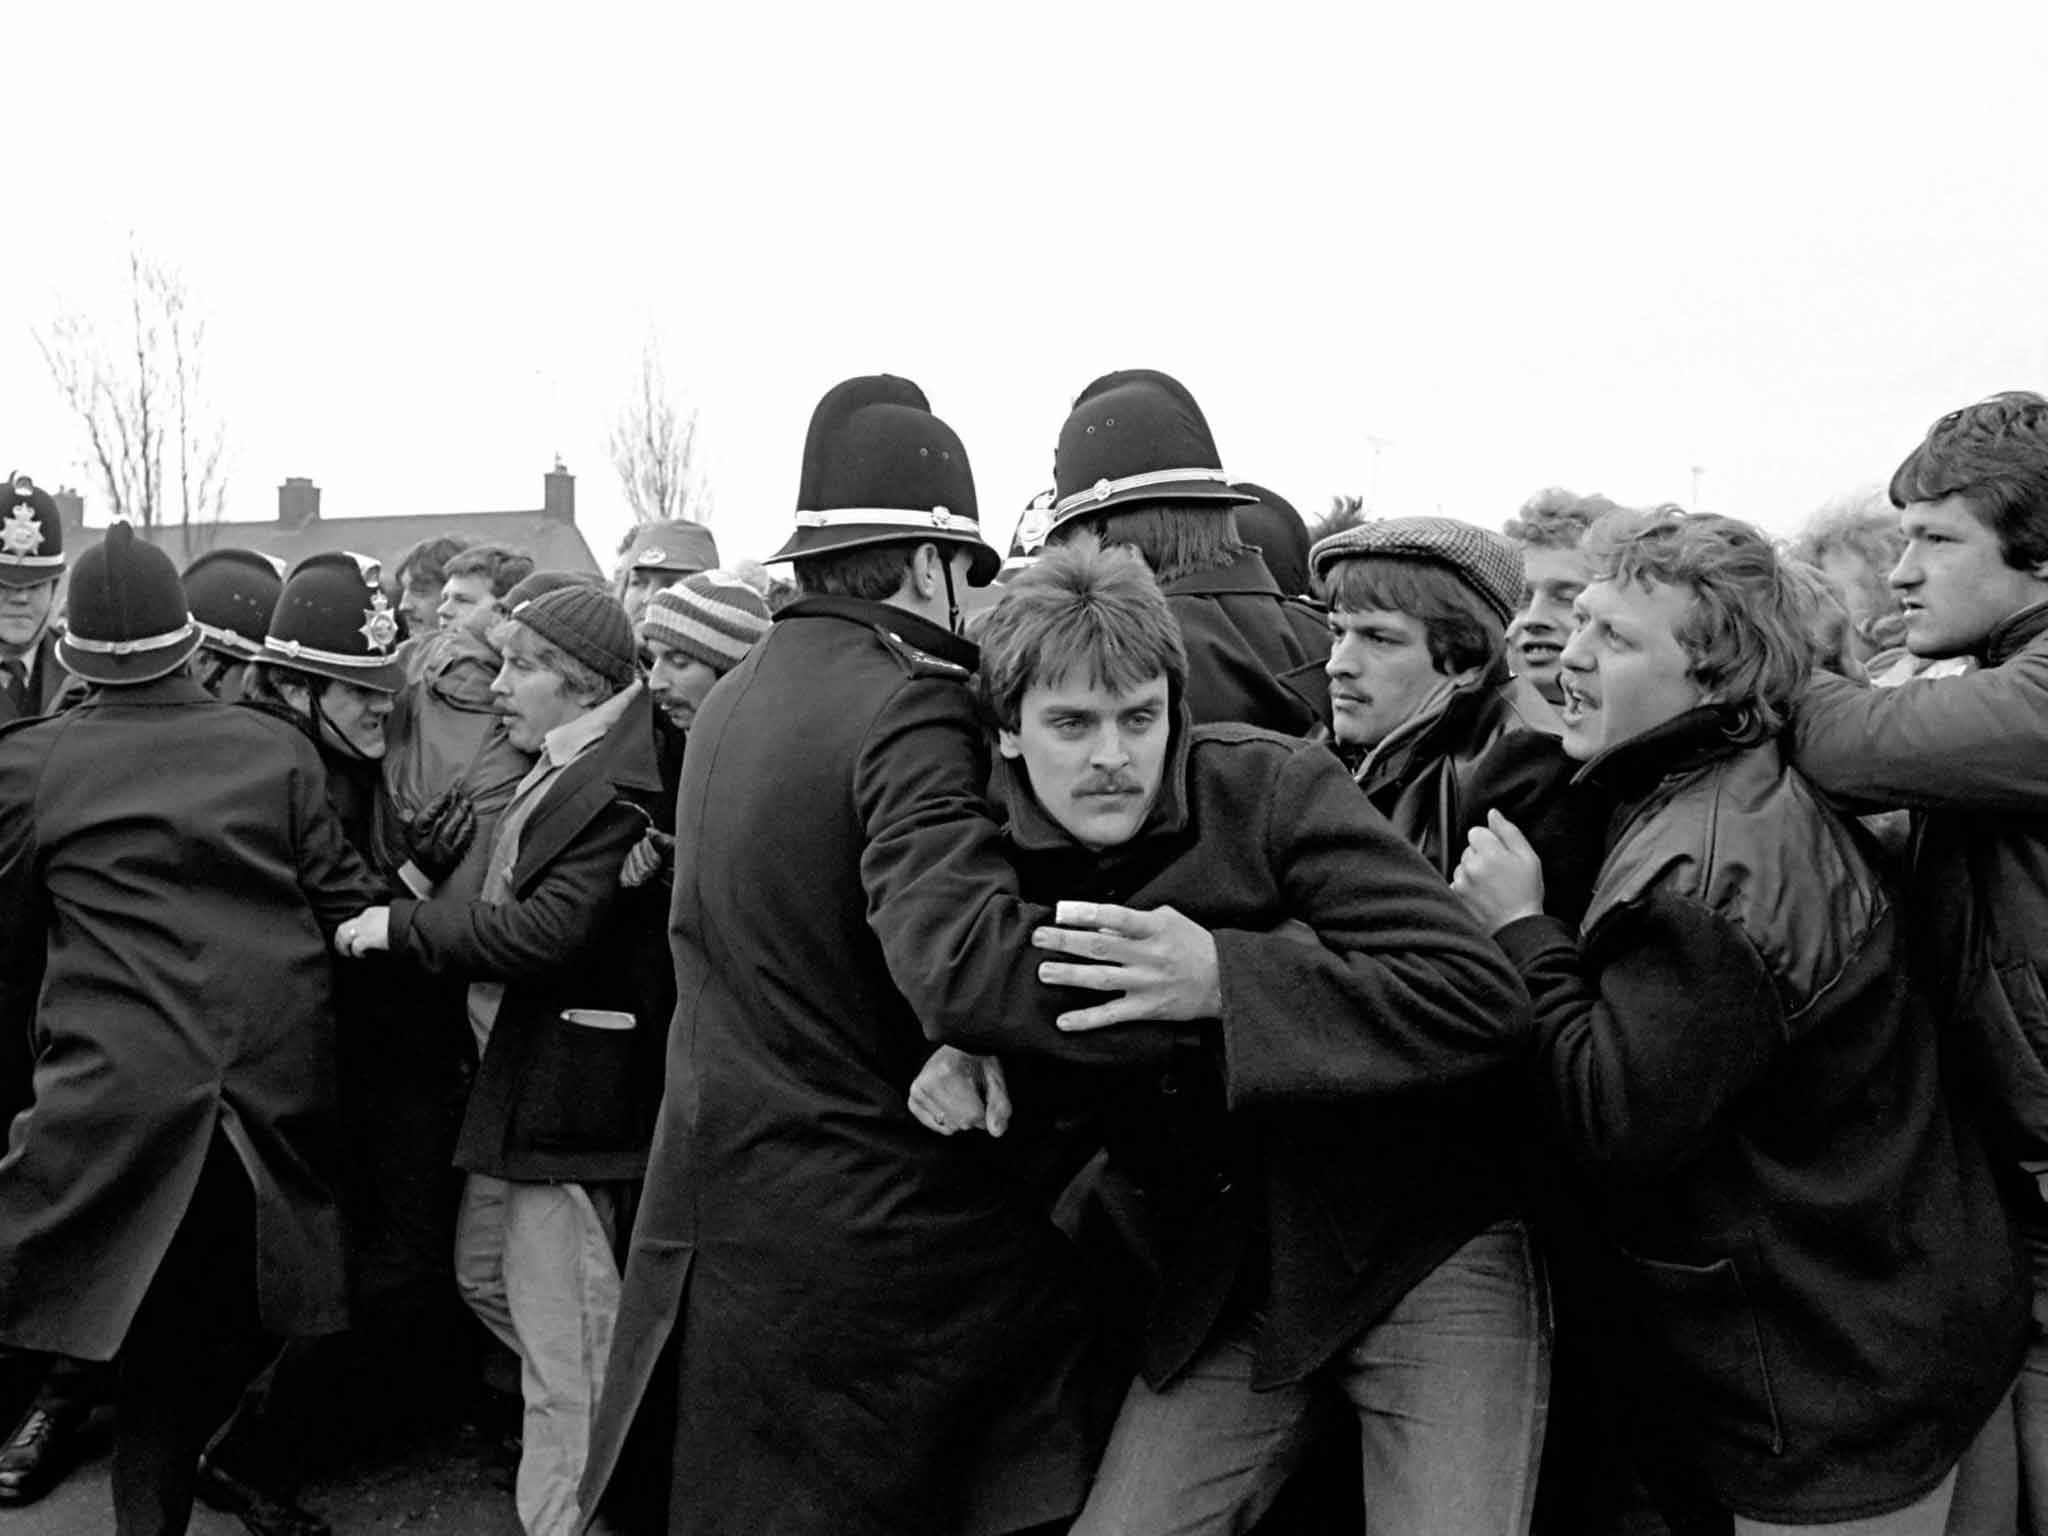 Coal not dole: striking workers are held back by police on the picket line at the Port Talbot Steelworks, South Wales in 1984